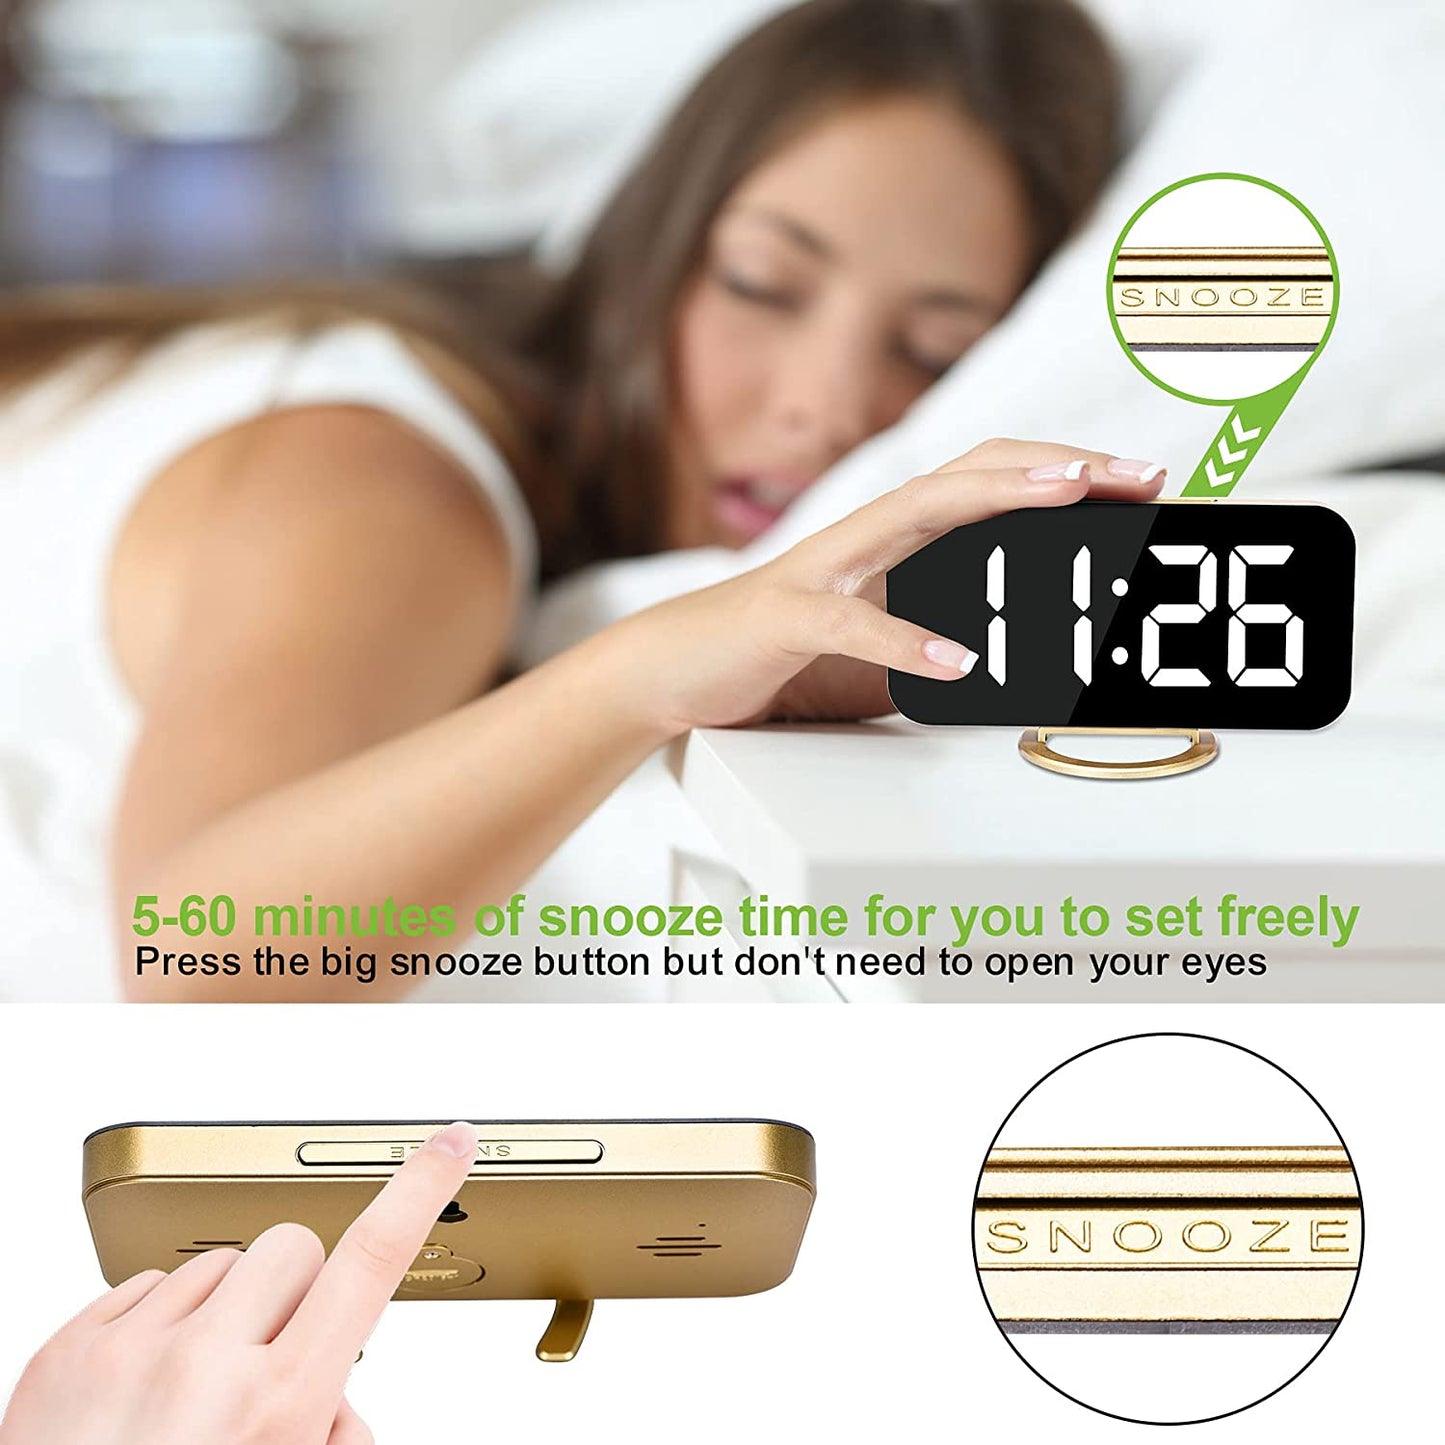 Large Digital Alarm Clock w/ LED and Mirror Dual USB Charger Ports 3 Levels